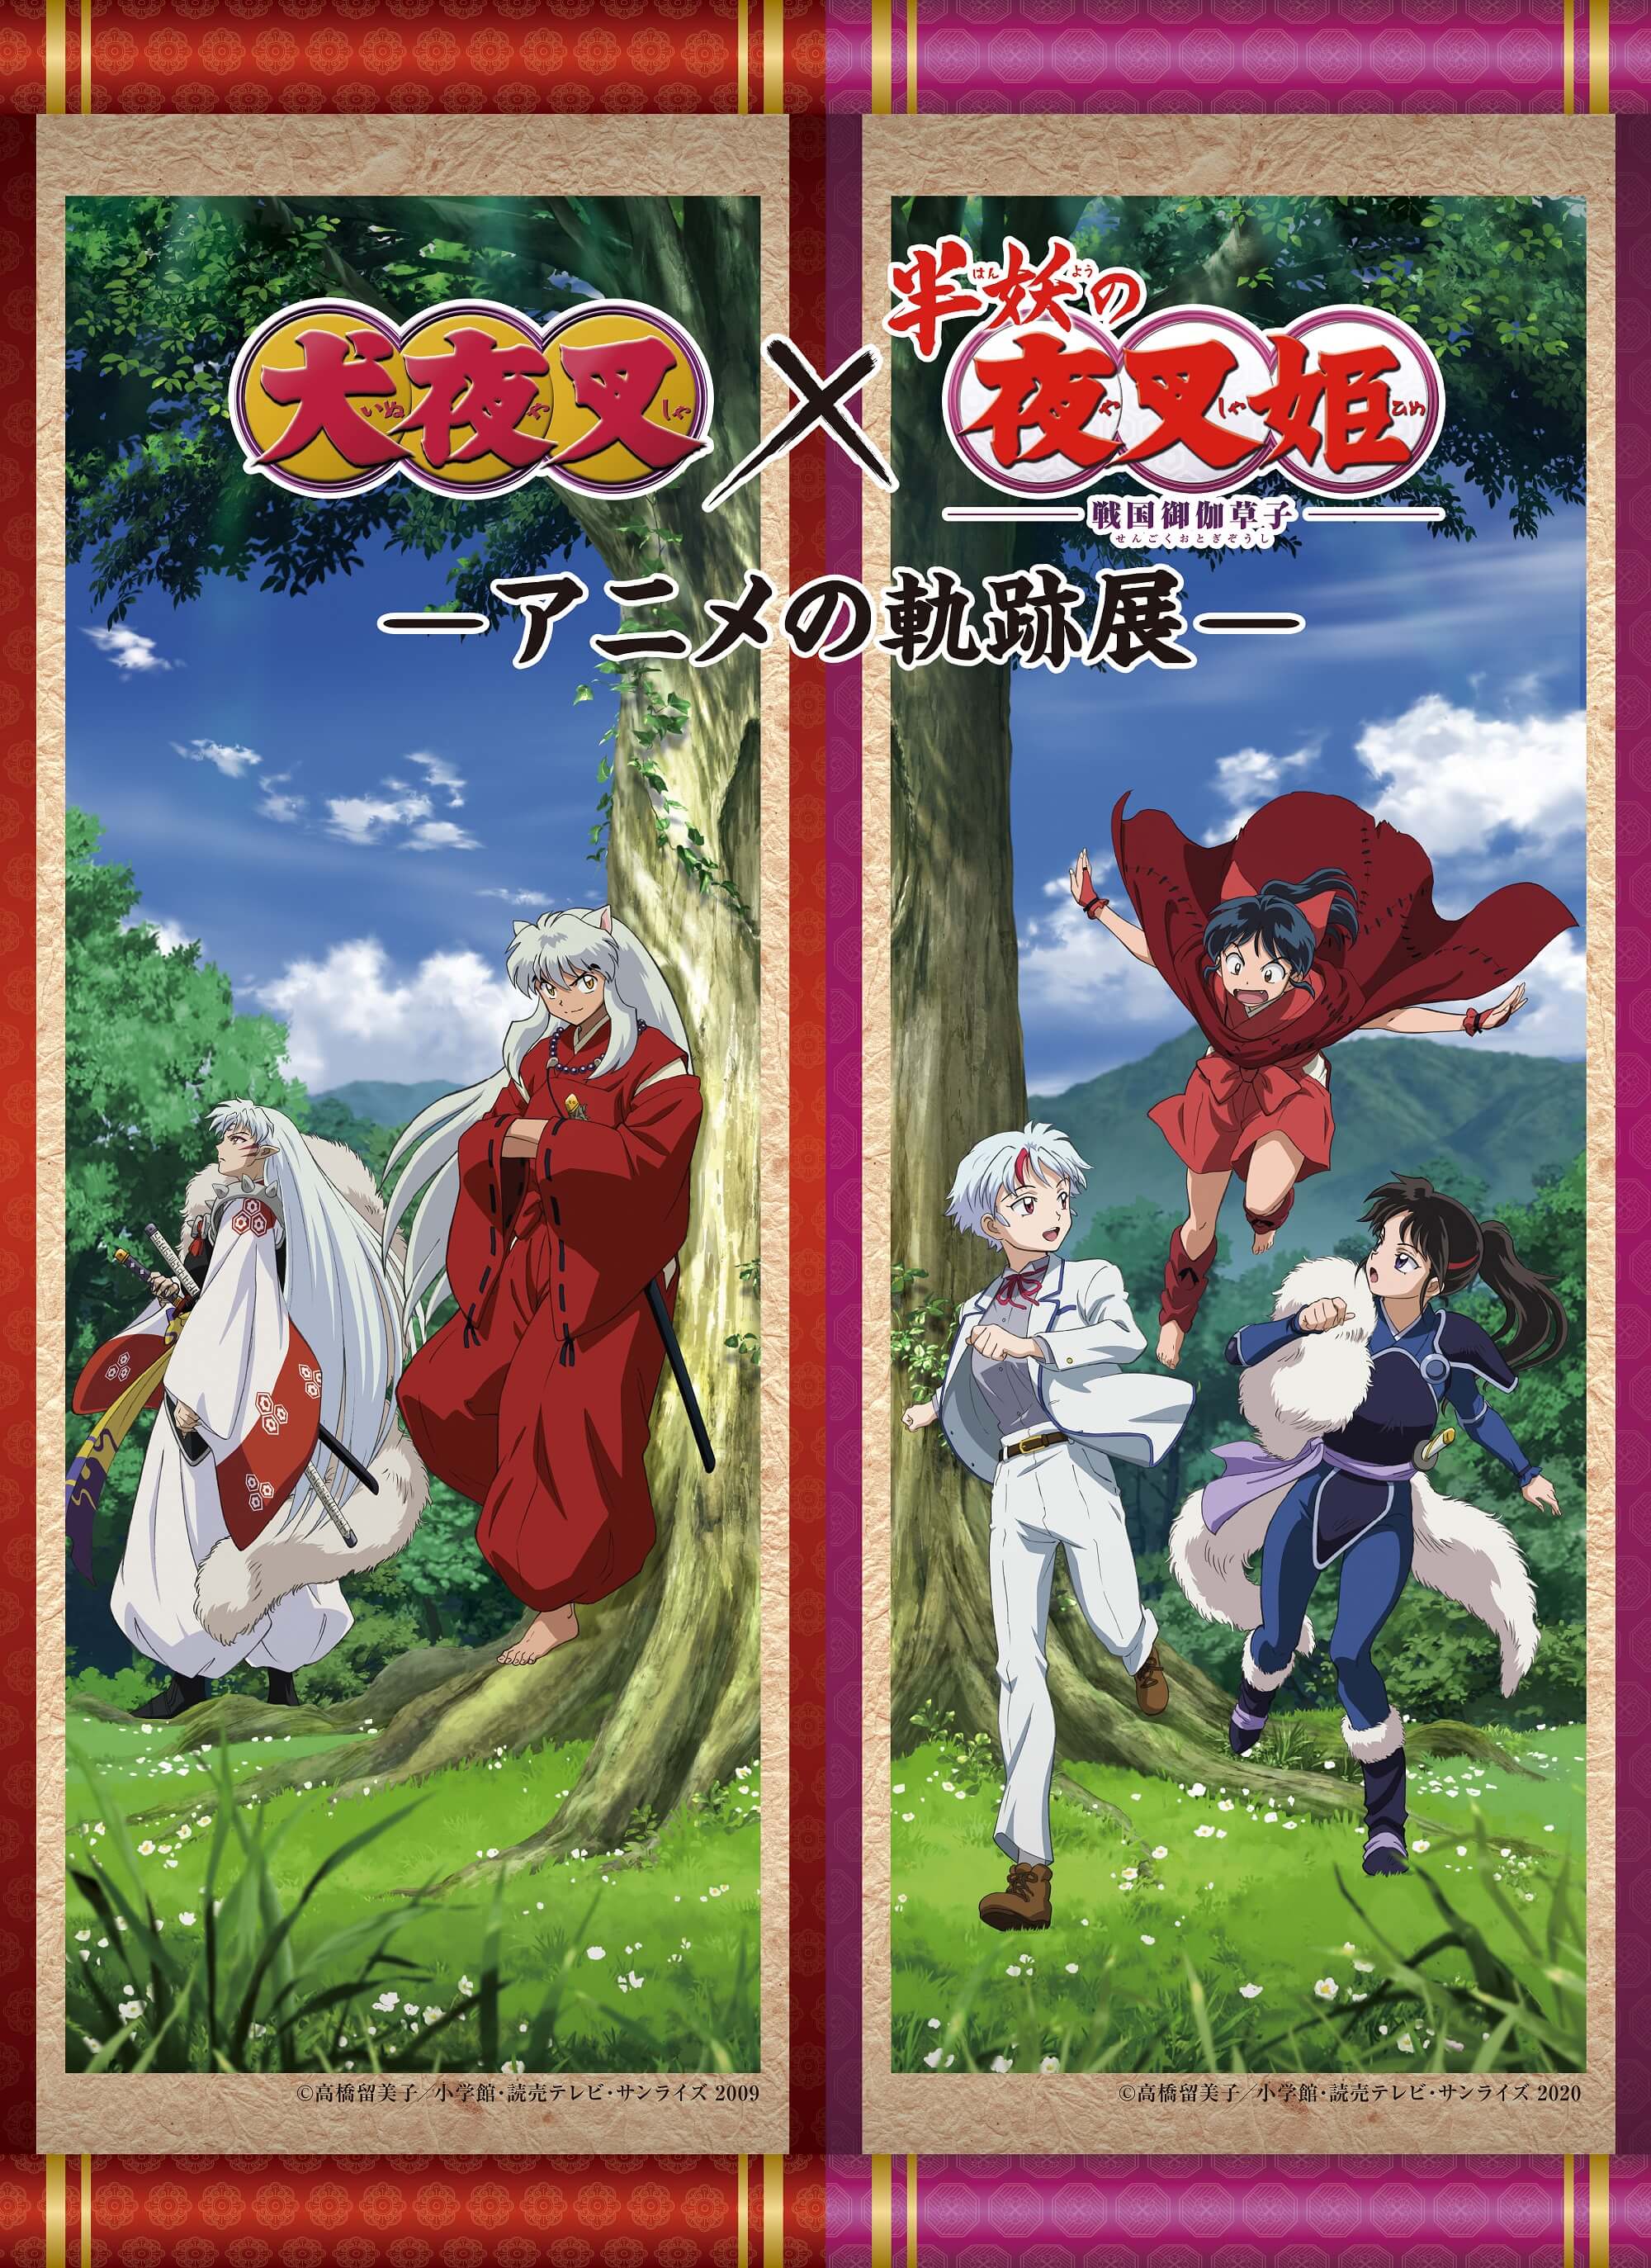 Inuyasha Sequel Reveals Official Title First Story Details